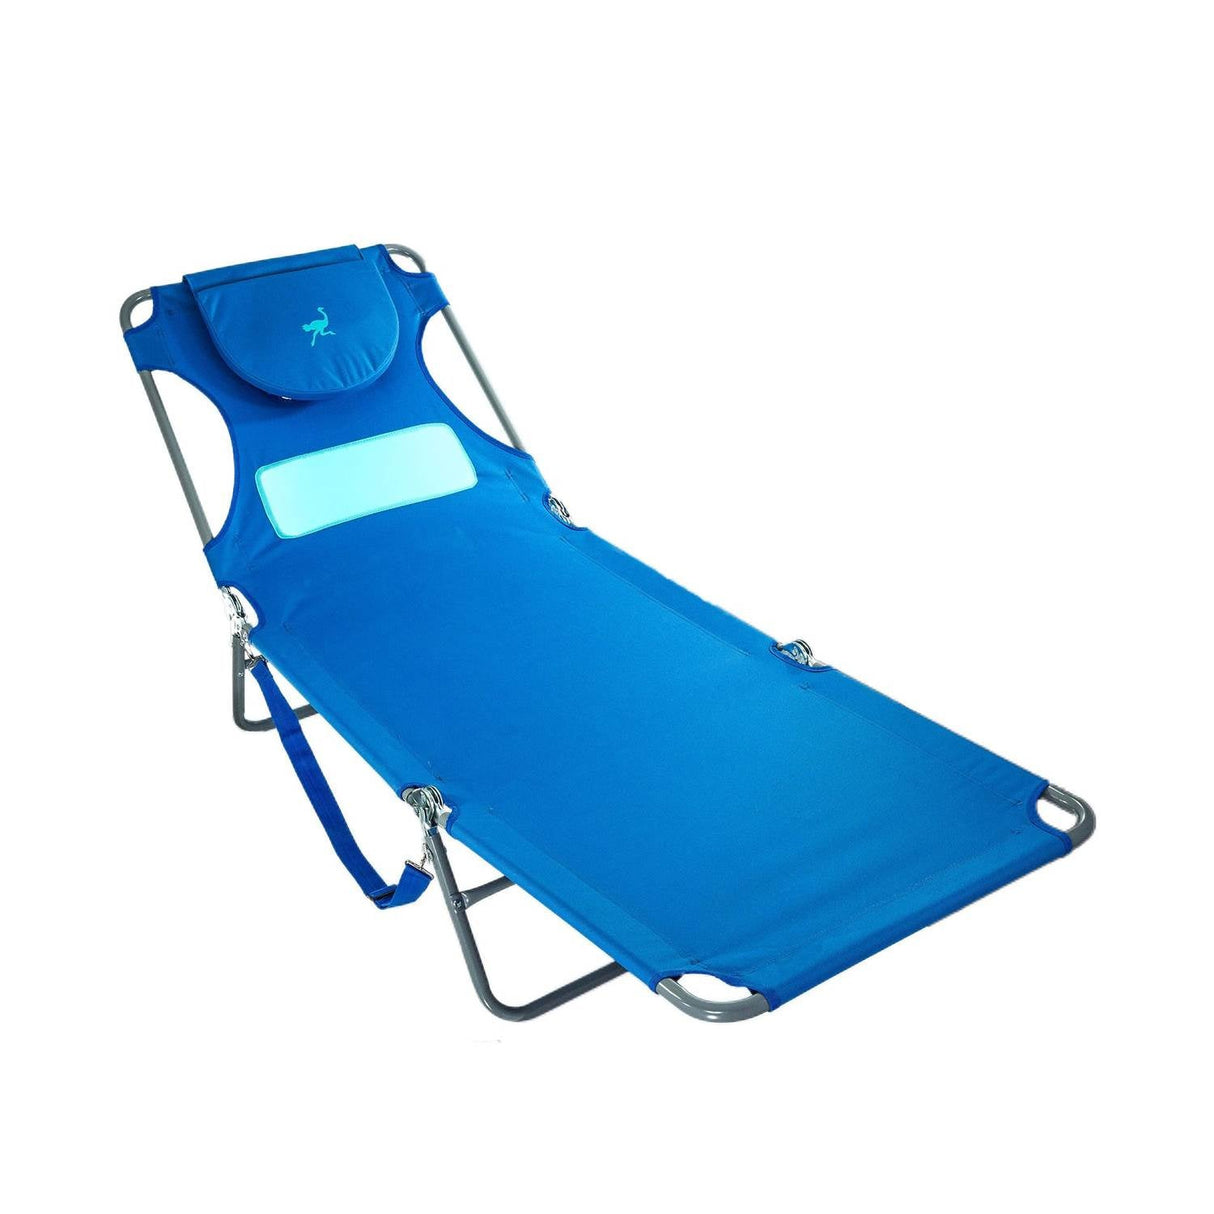 Ostrich Ladies Comfort Lounger, Beach Camping Pool Tanning Chair, Ocean Blue